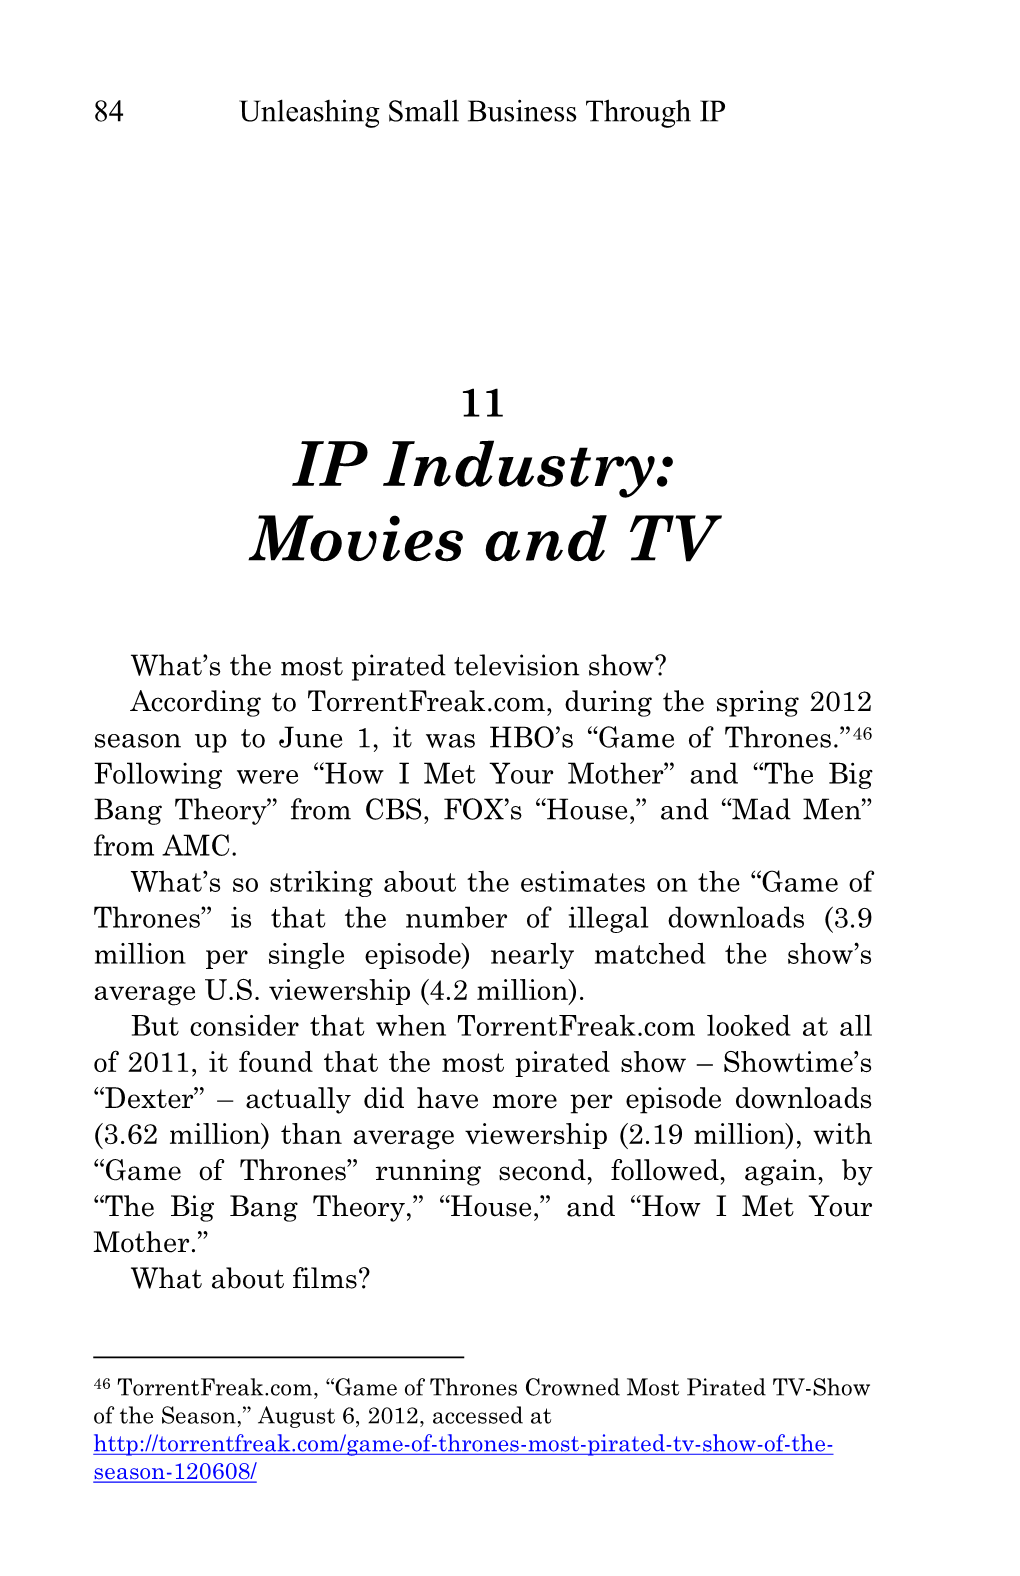 IP Industry: Movies and TV